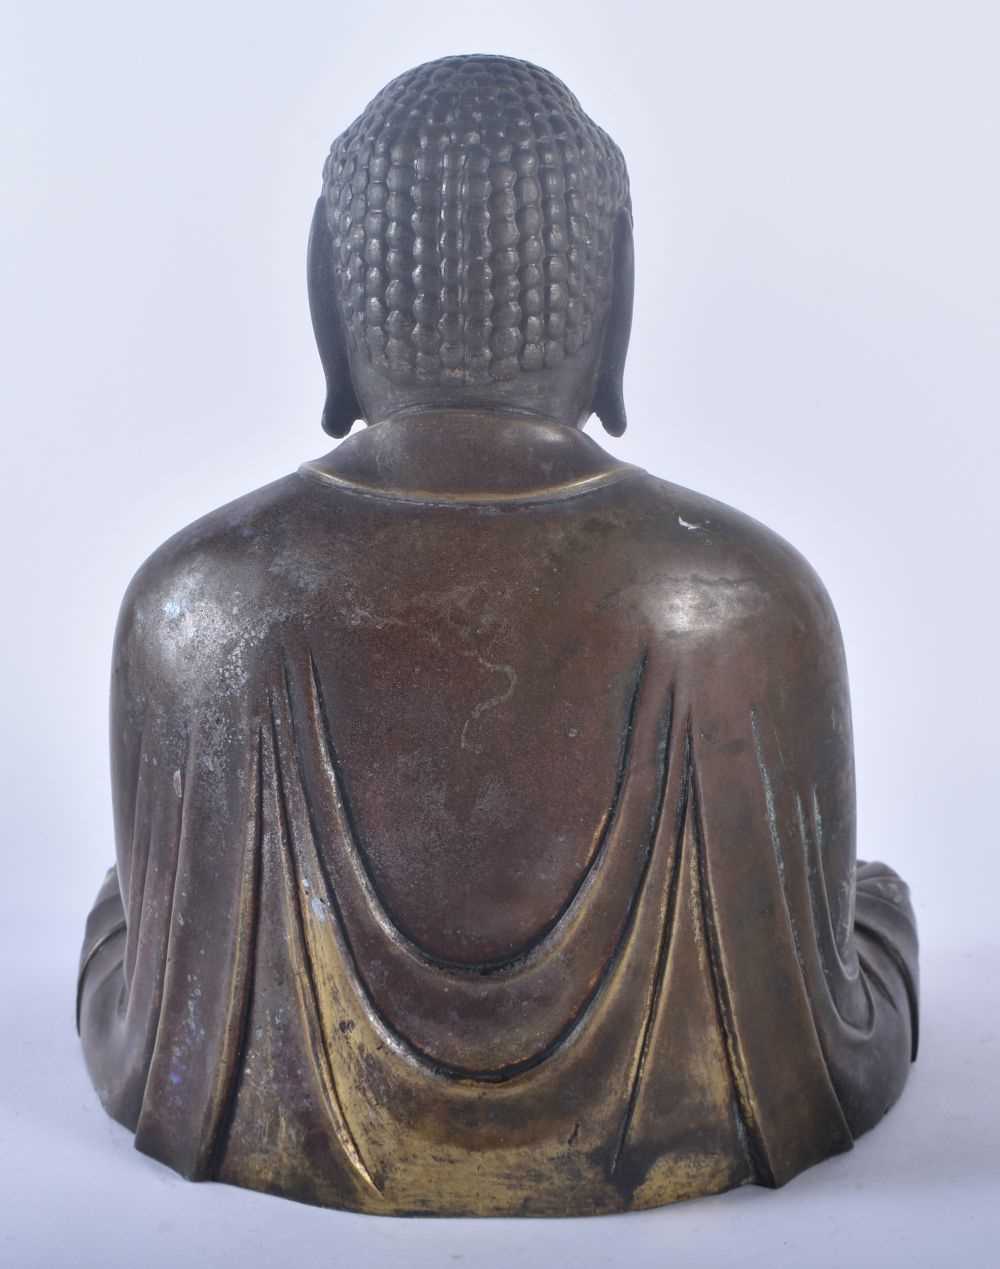 A 19TH CENTURY JAPANESE MEIJI PERIOD BRONZE FIGURE OF A BUDDHA modelled in robes. 24 cm x 16 cm. - Image 5 of 6